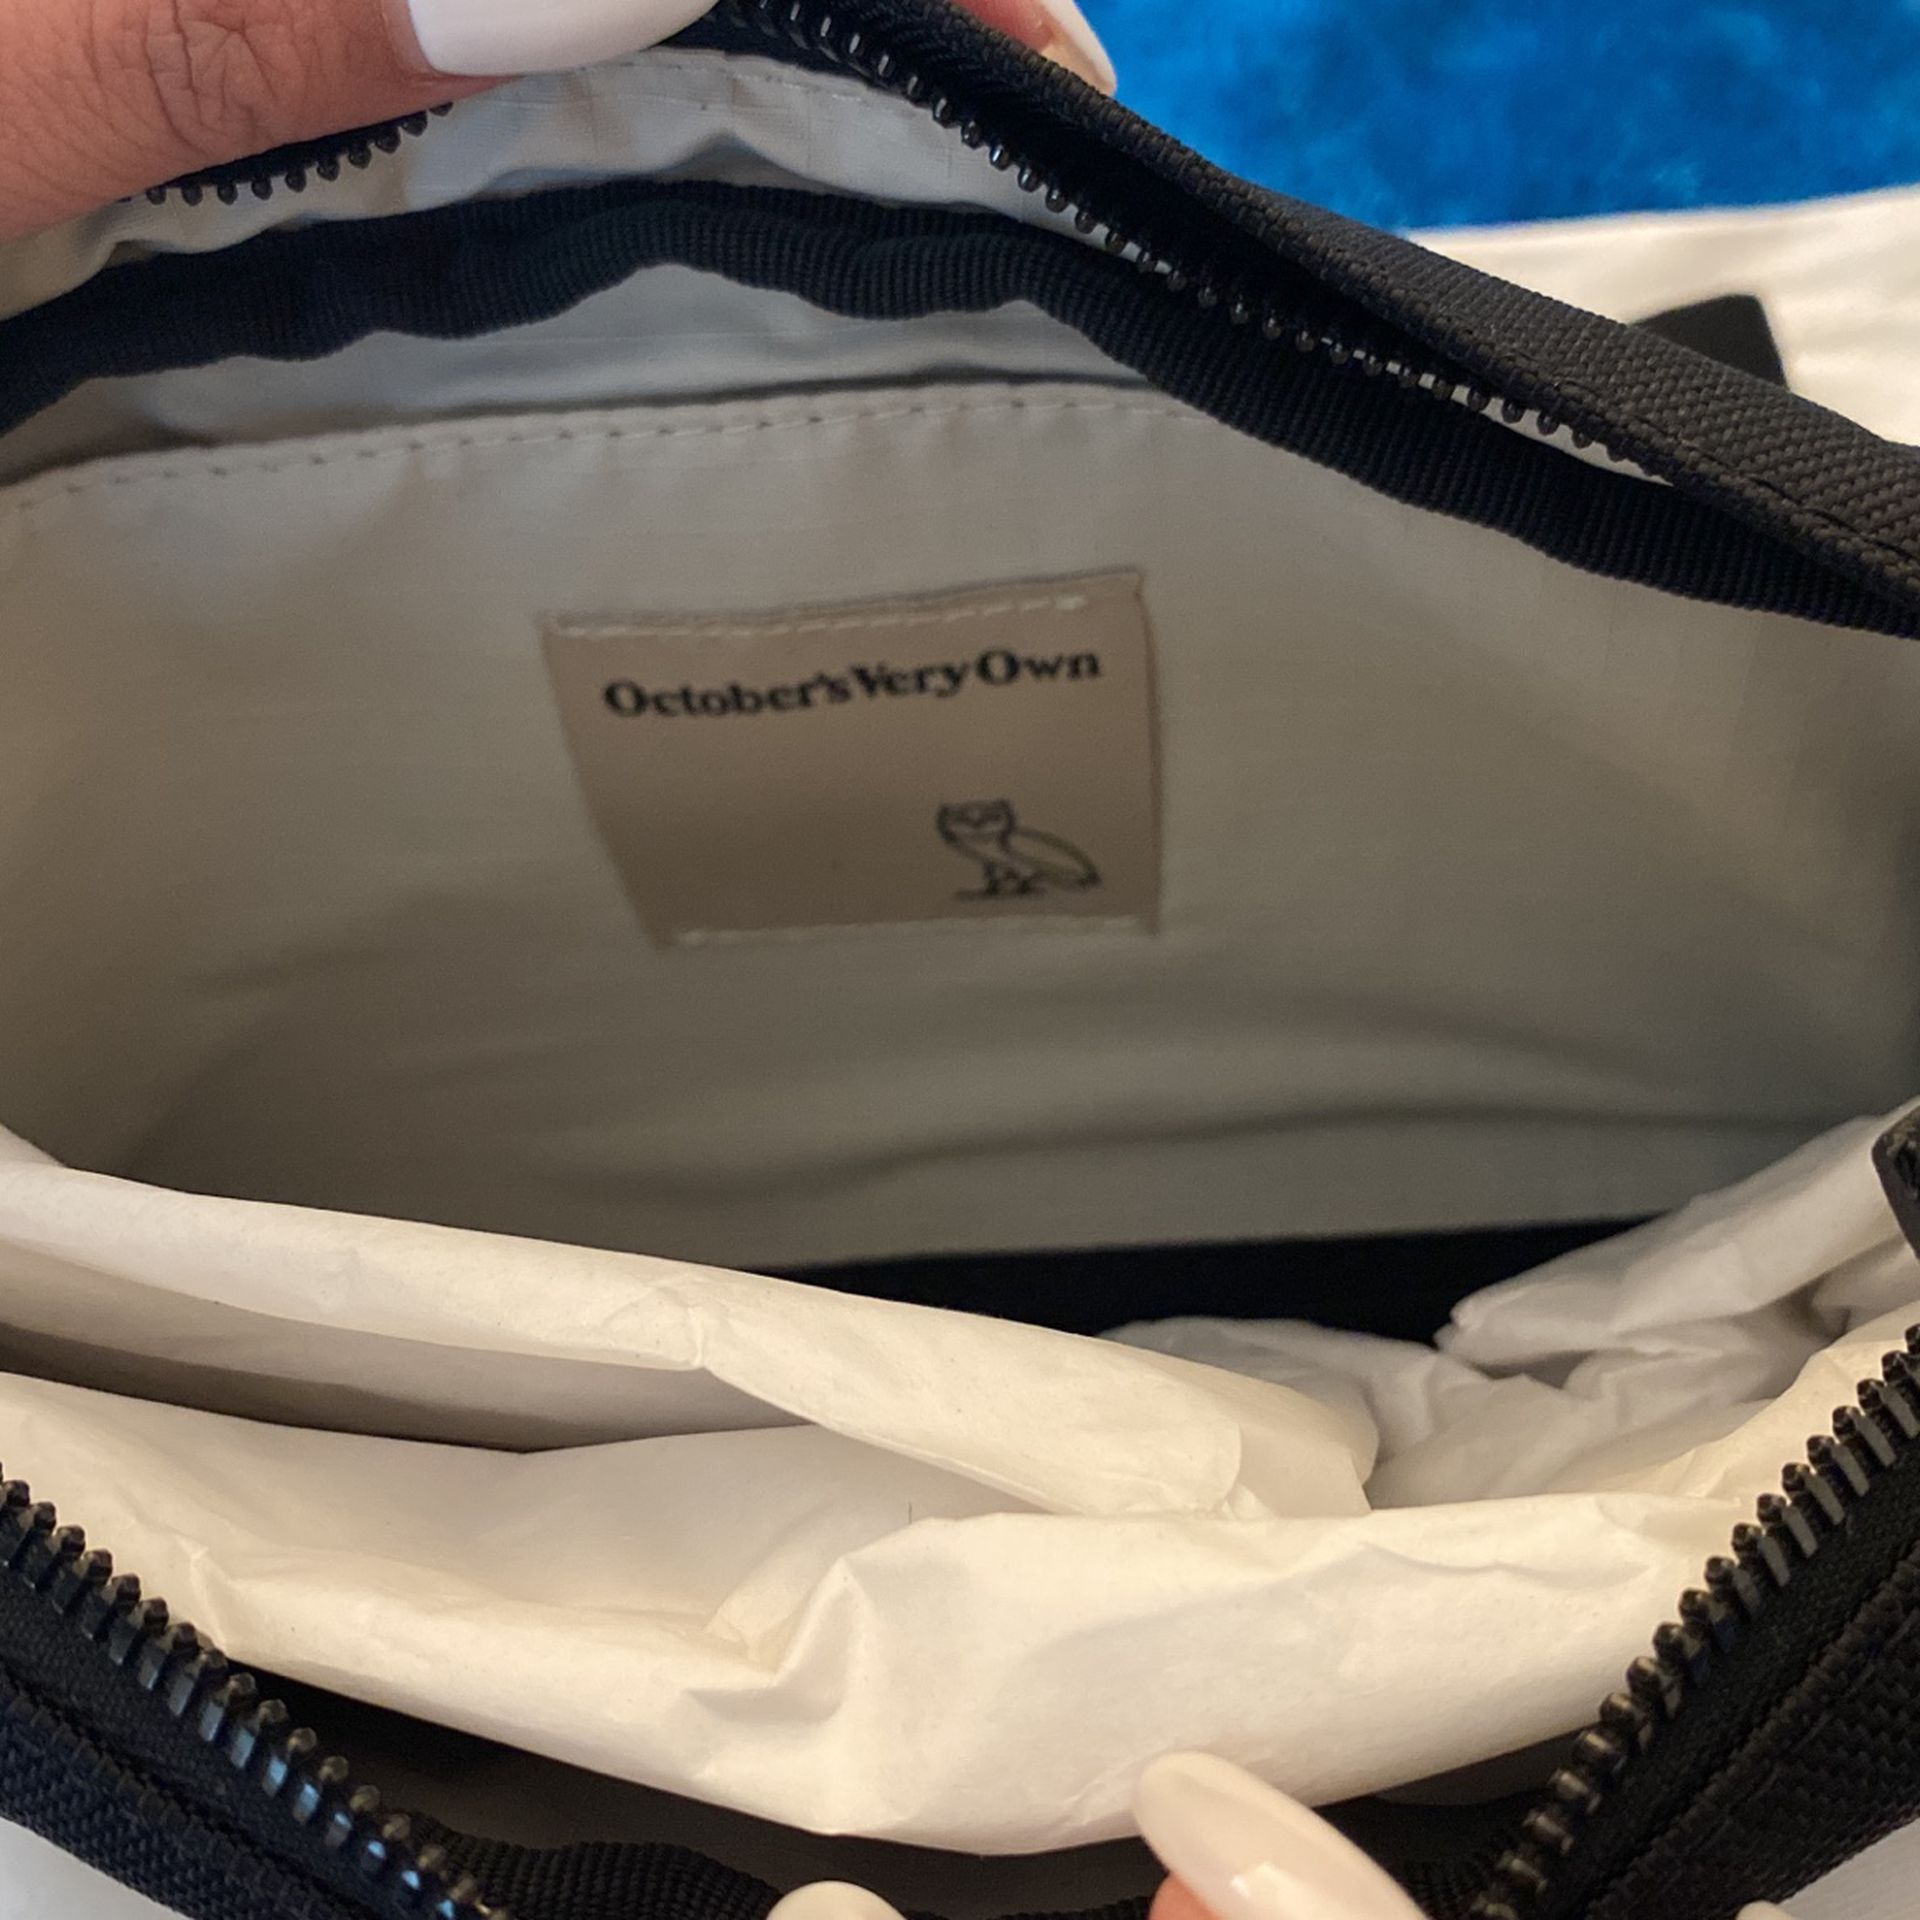 Supreme Small Waist Bag FW22 for Sale in Hayward, CA - OfferUp